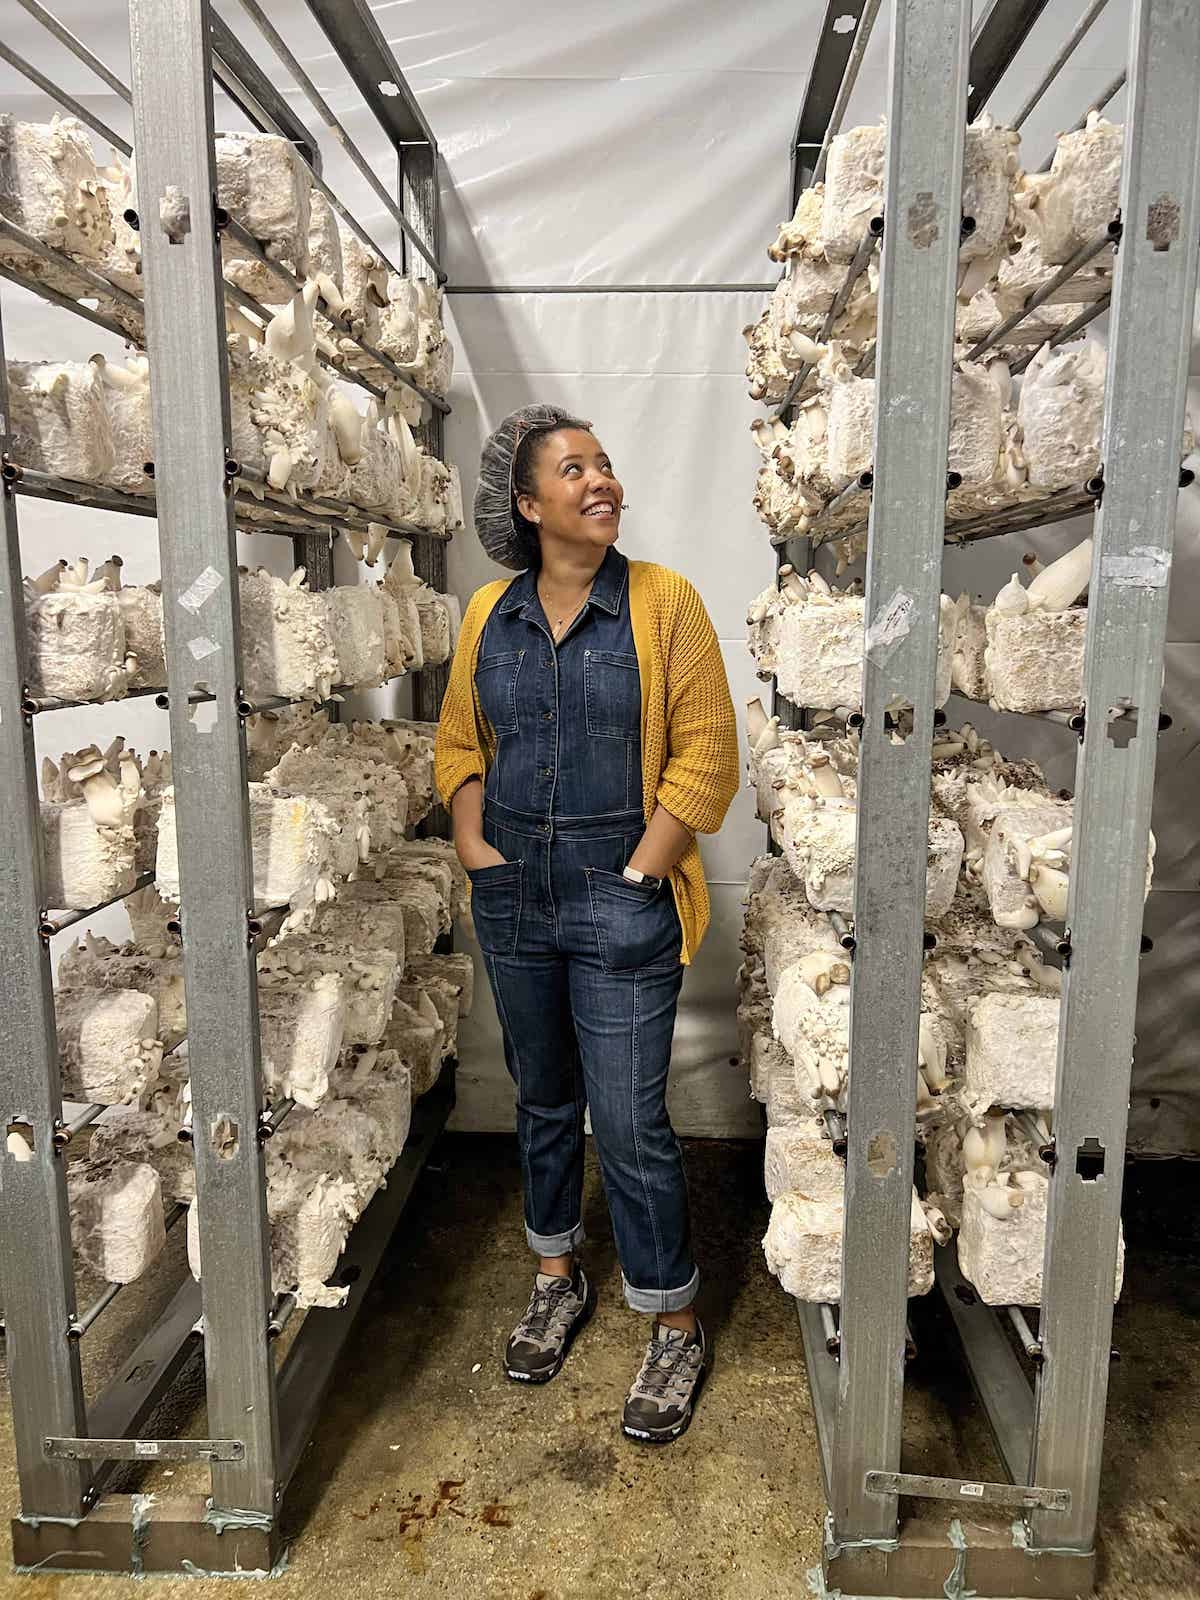 Jessica from Big Delicious Life standing between racks of mushrooms in the cultivation room at Far West Fungi.